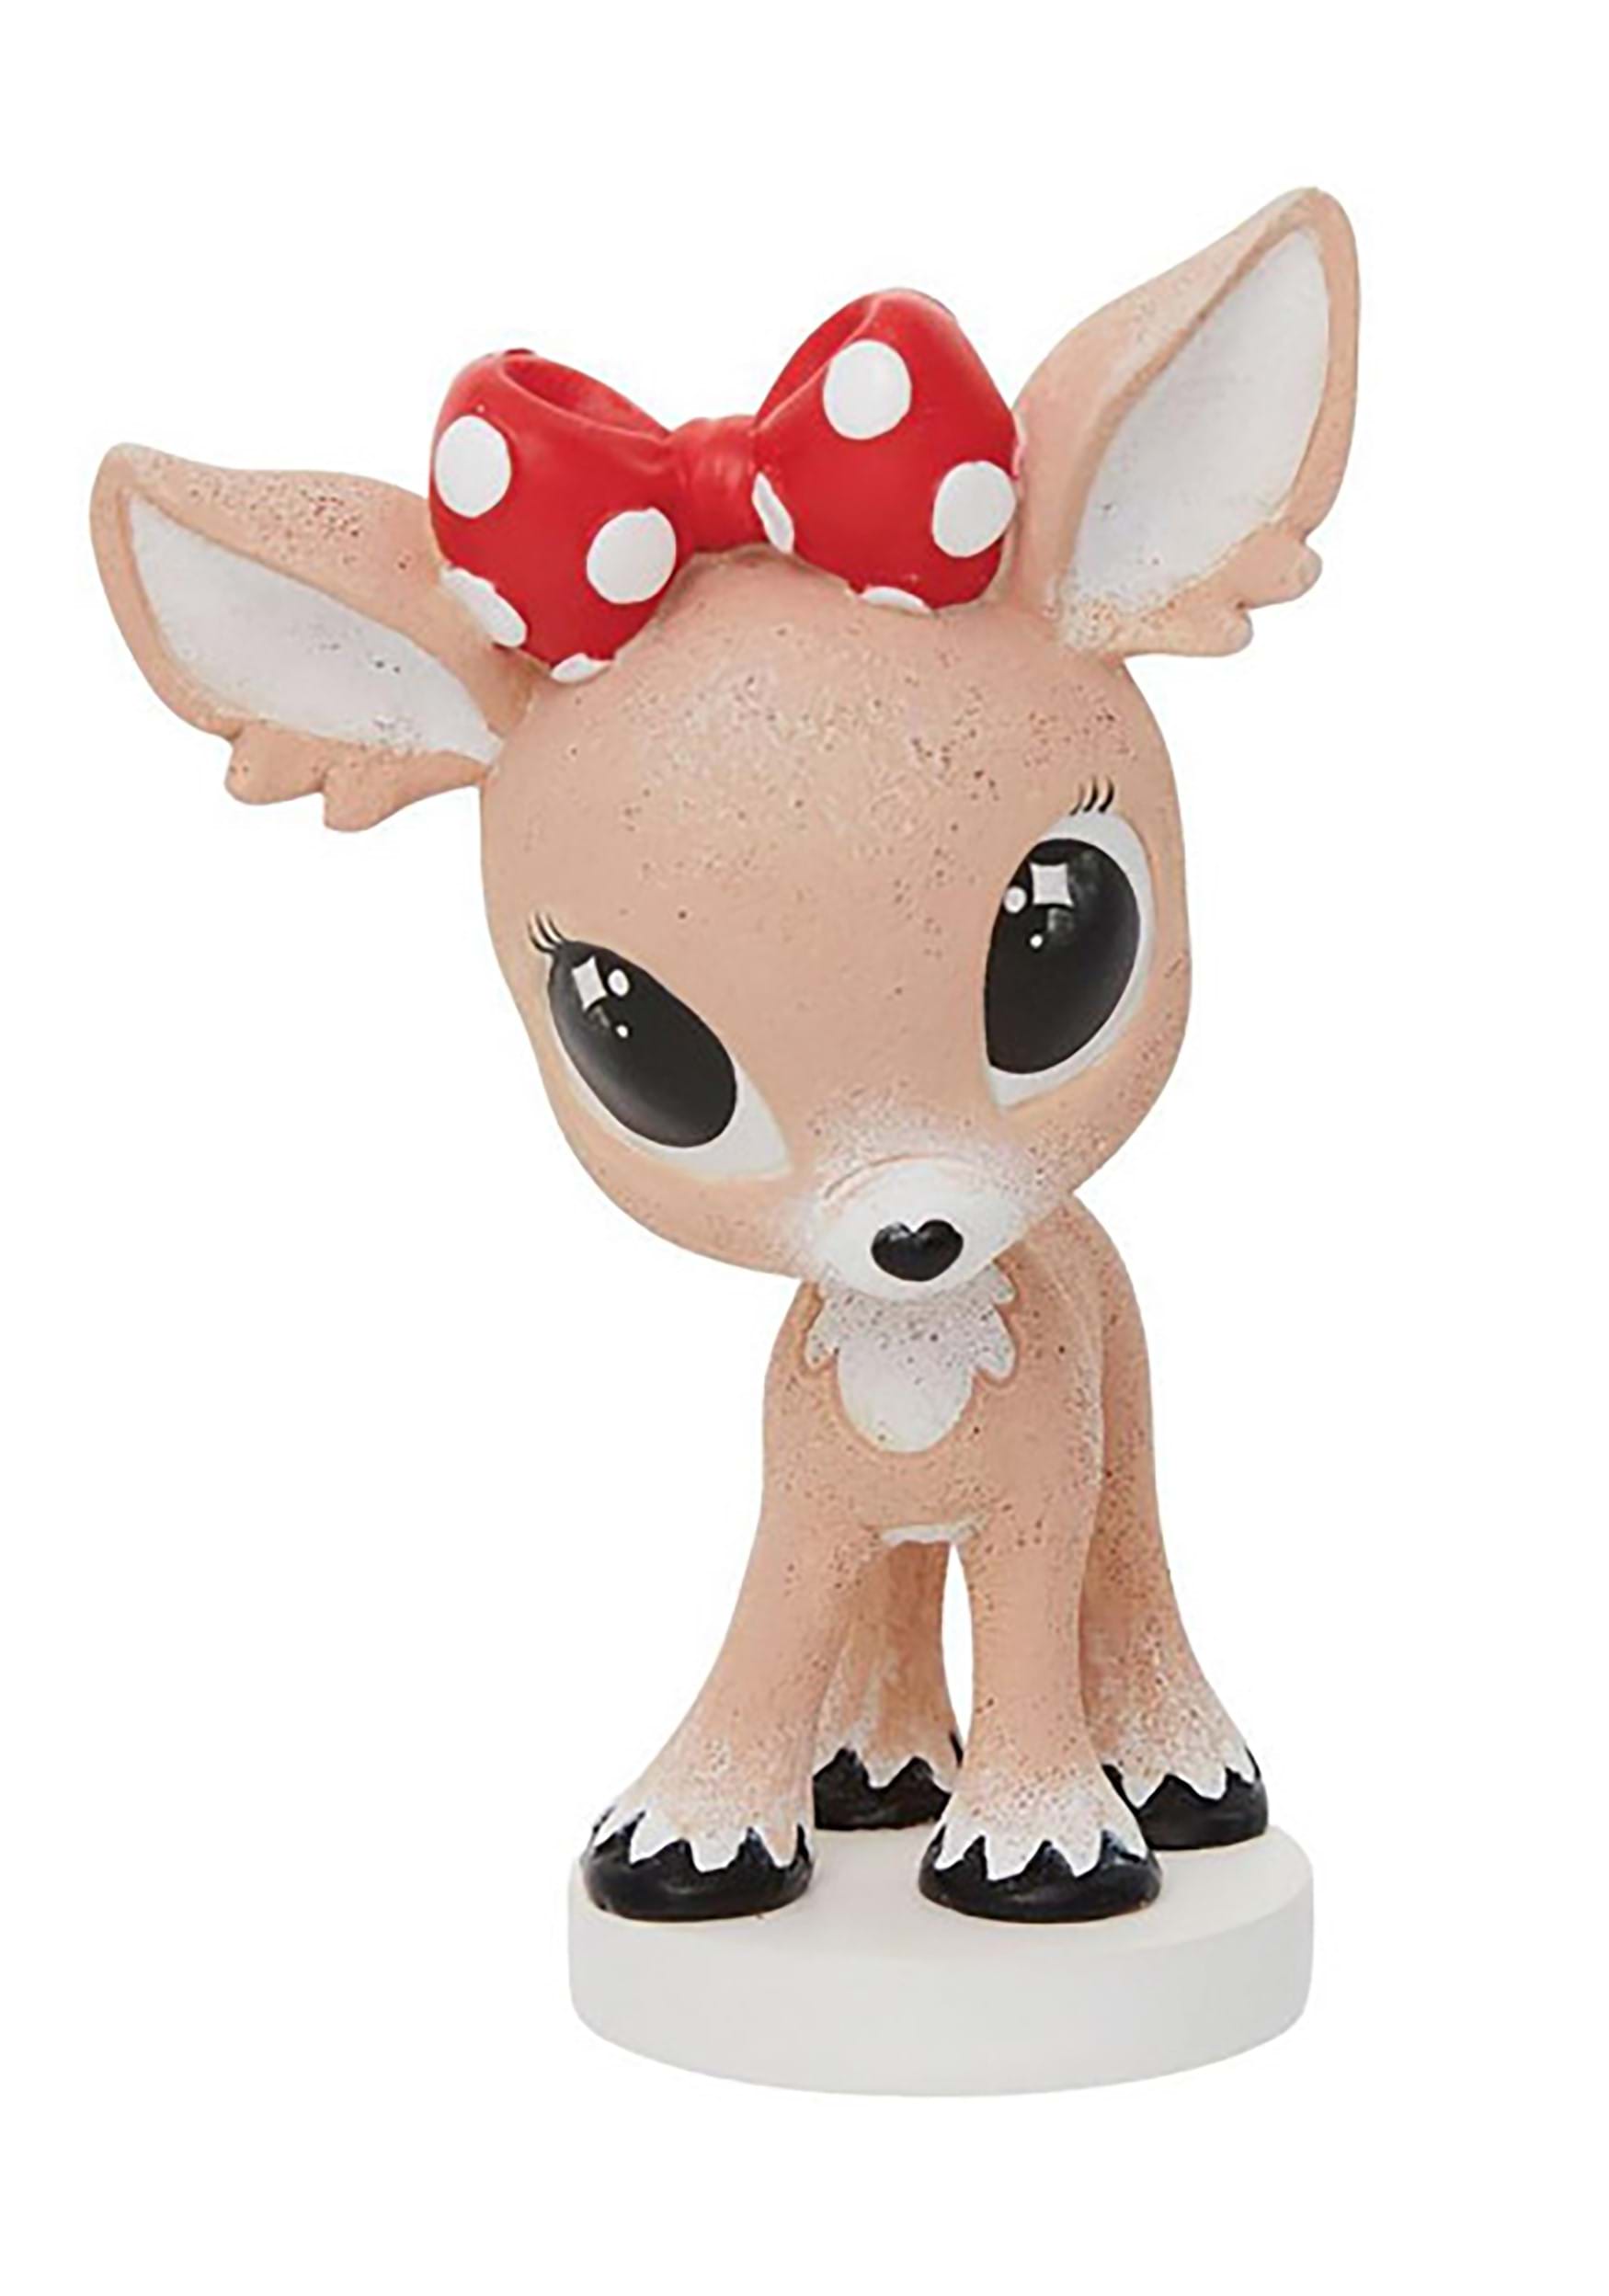 Clarice Kawaii Rudolph Collection Statue